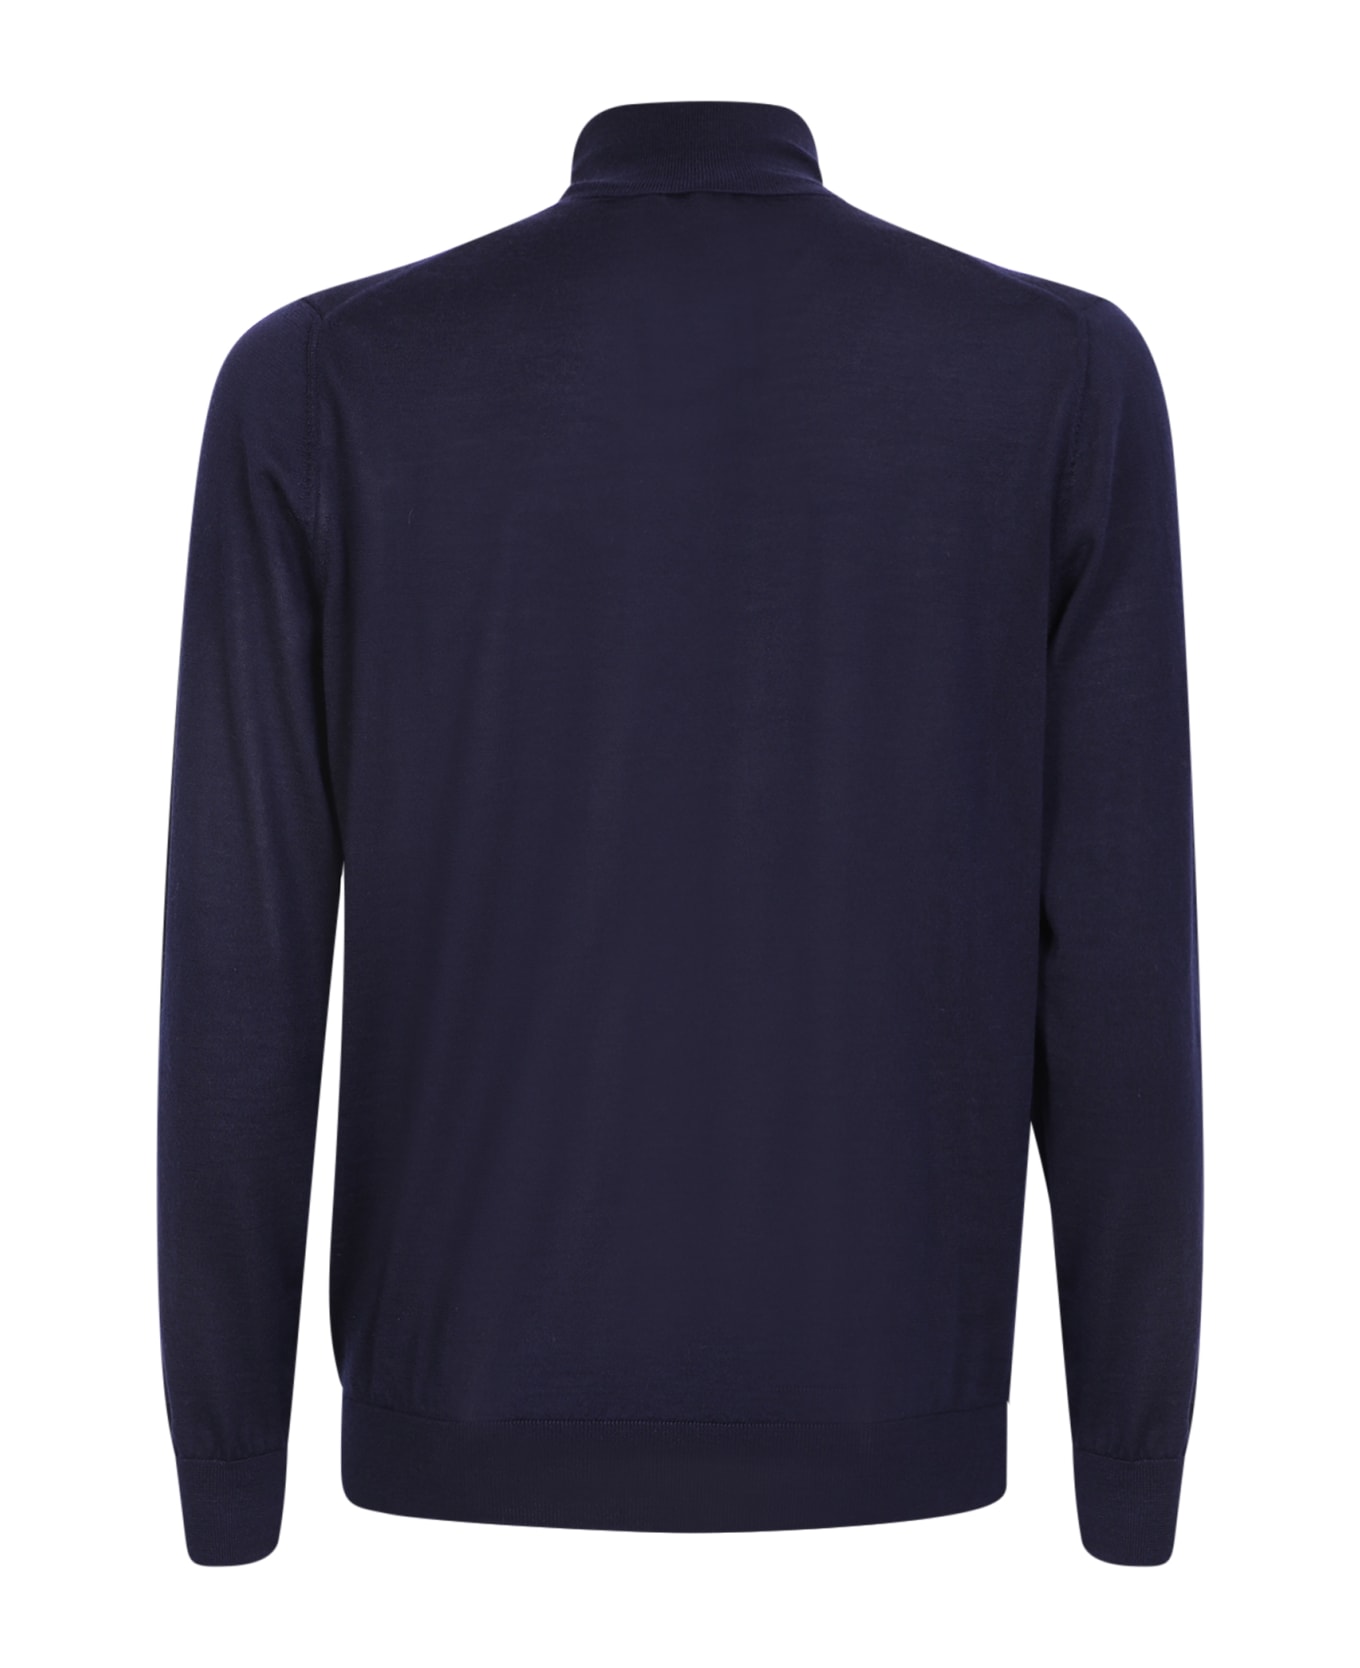 Colombo Blue Silk And Cashmere Sweater - Blue ニットウェア